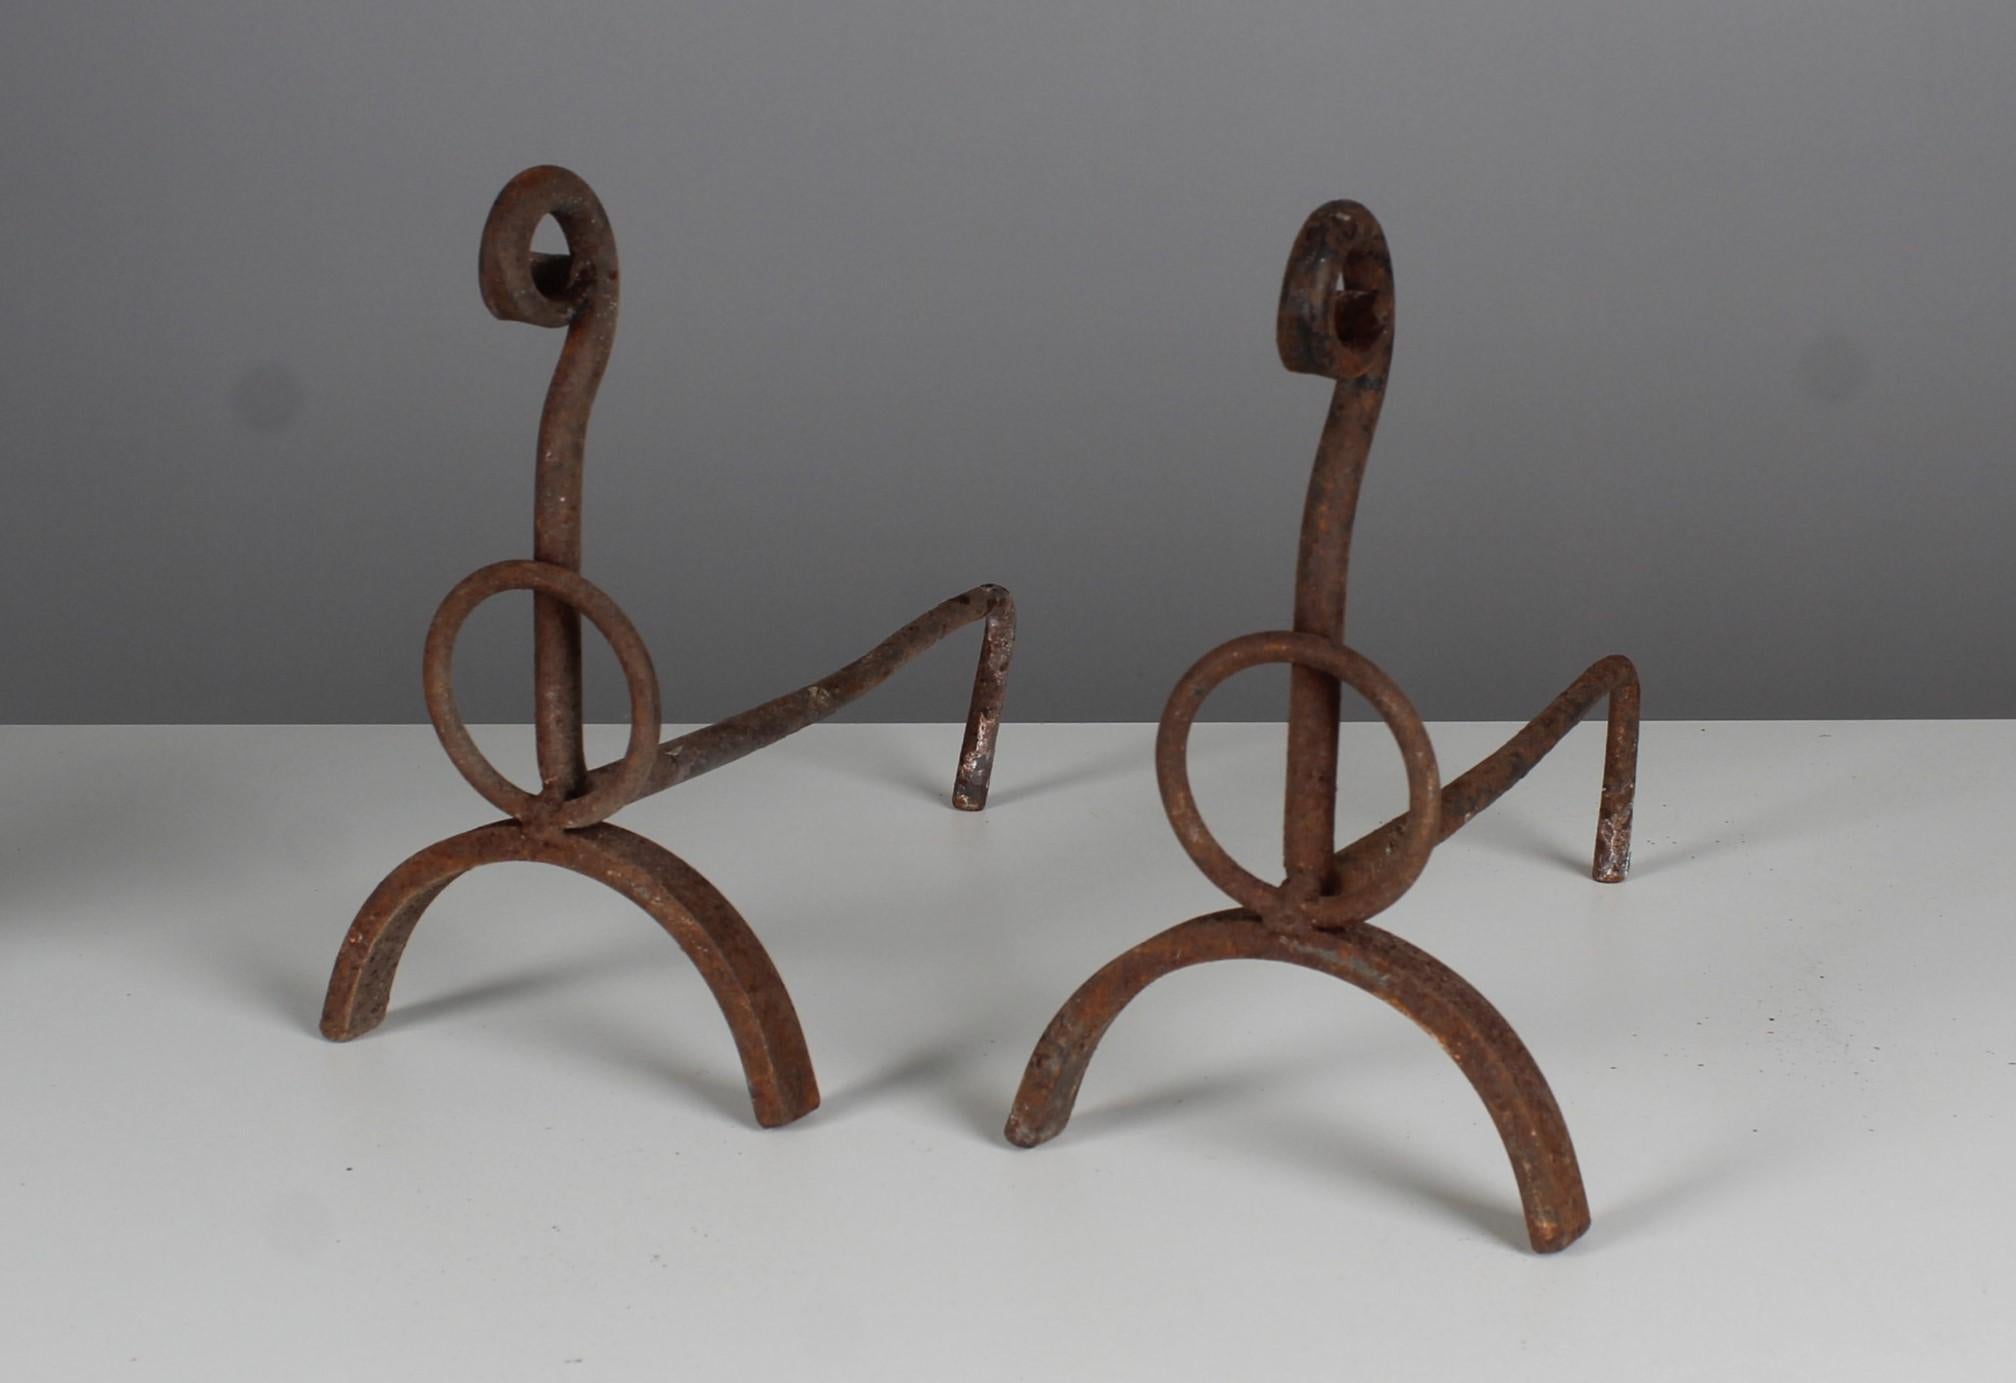 Pair of andirons in a plain design.
France, 1880-1900.
Solid iron in good condition according to its age.

Firedogs are used as a holder for firewood in a fireplace. They are also known as a fire horse, andiron or chimney blocks. It usually consists